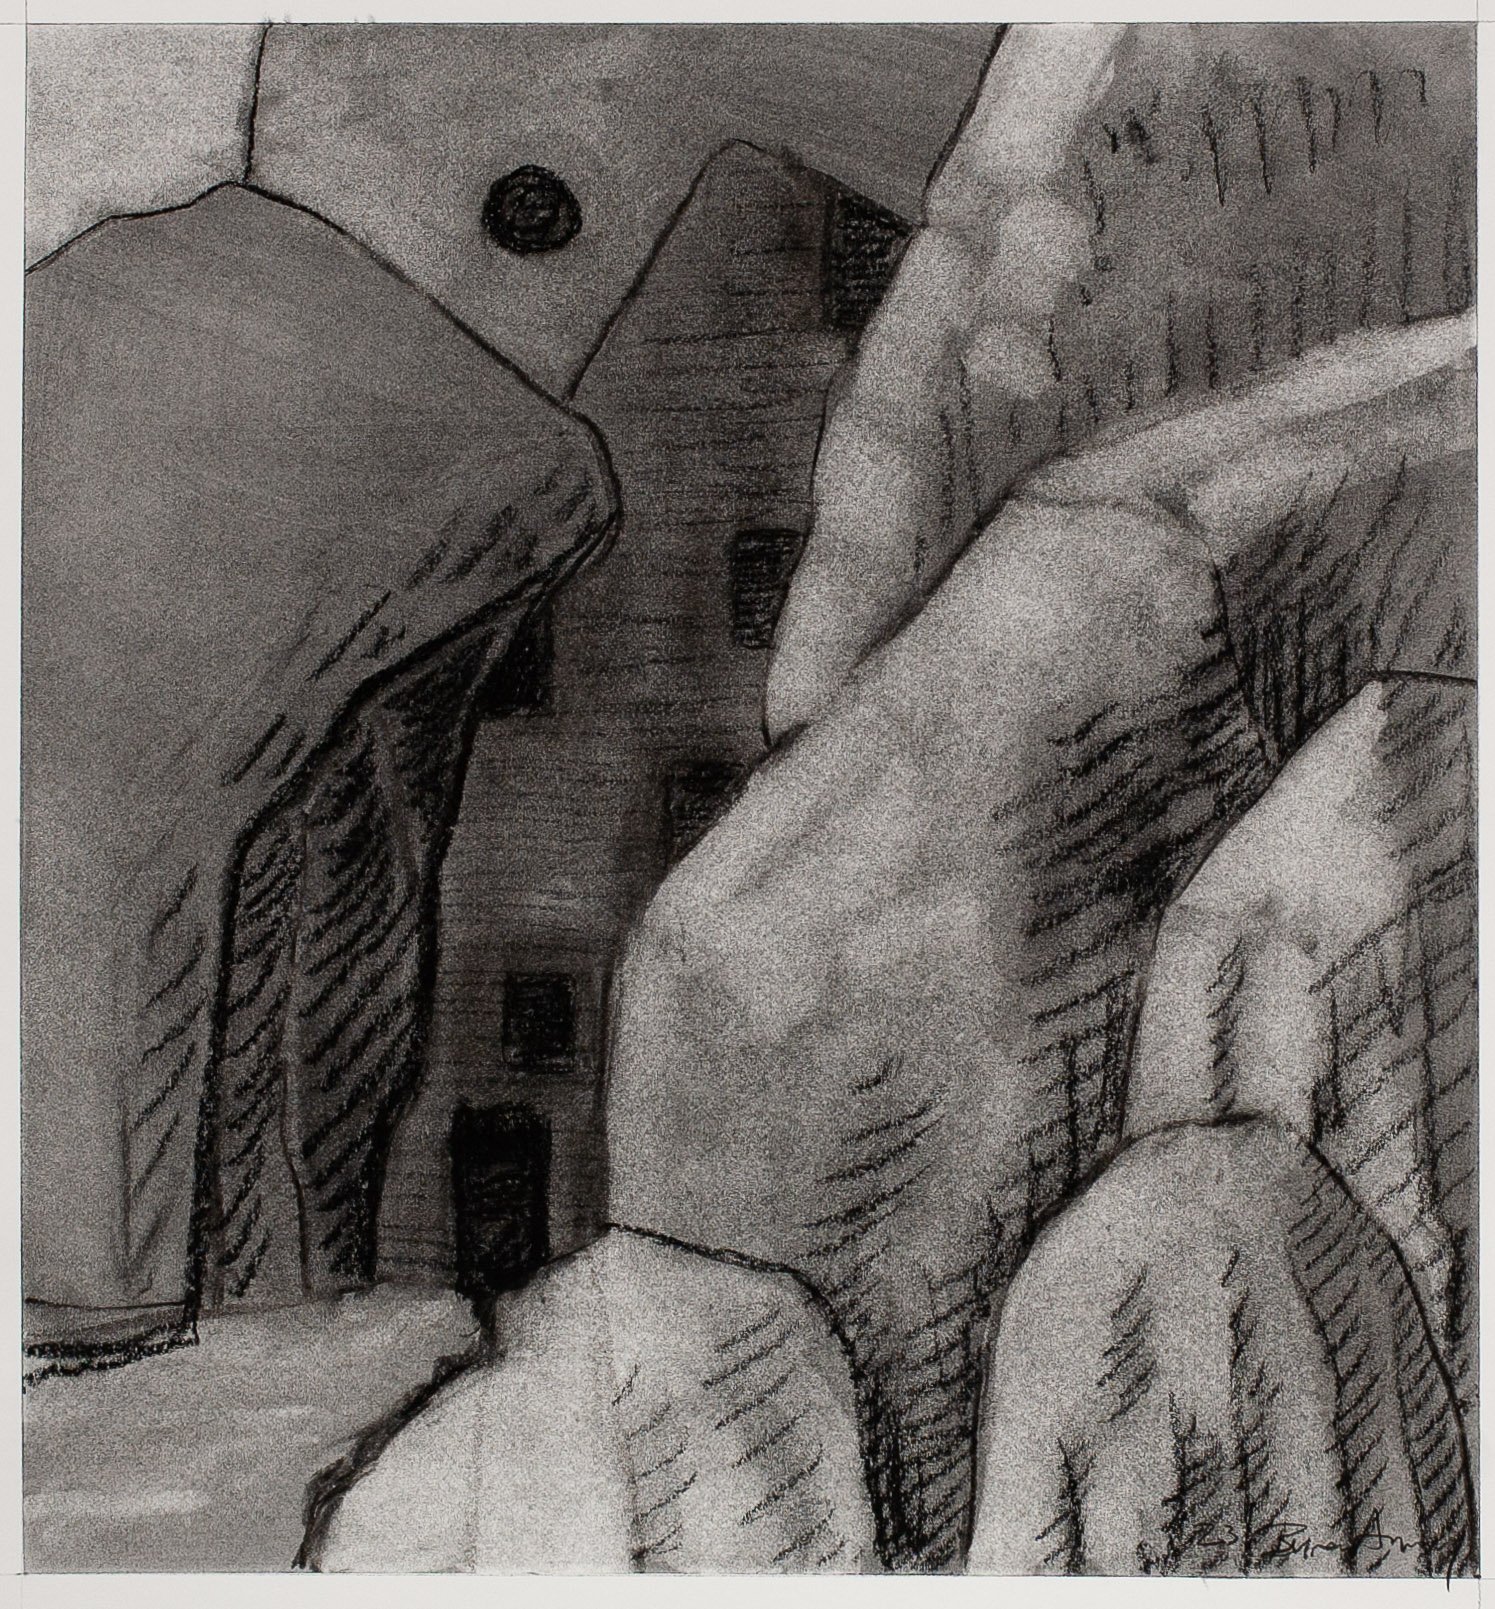   Hidden Cave (Pirates)   Powdered graphite and charcoal on paper  16 X 15 inches  2023     